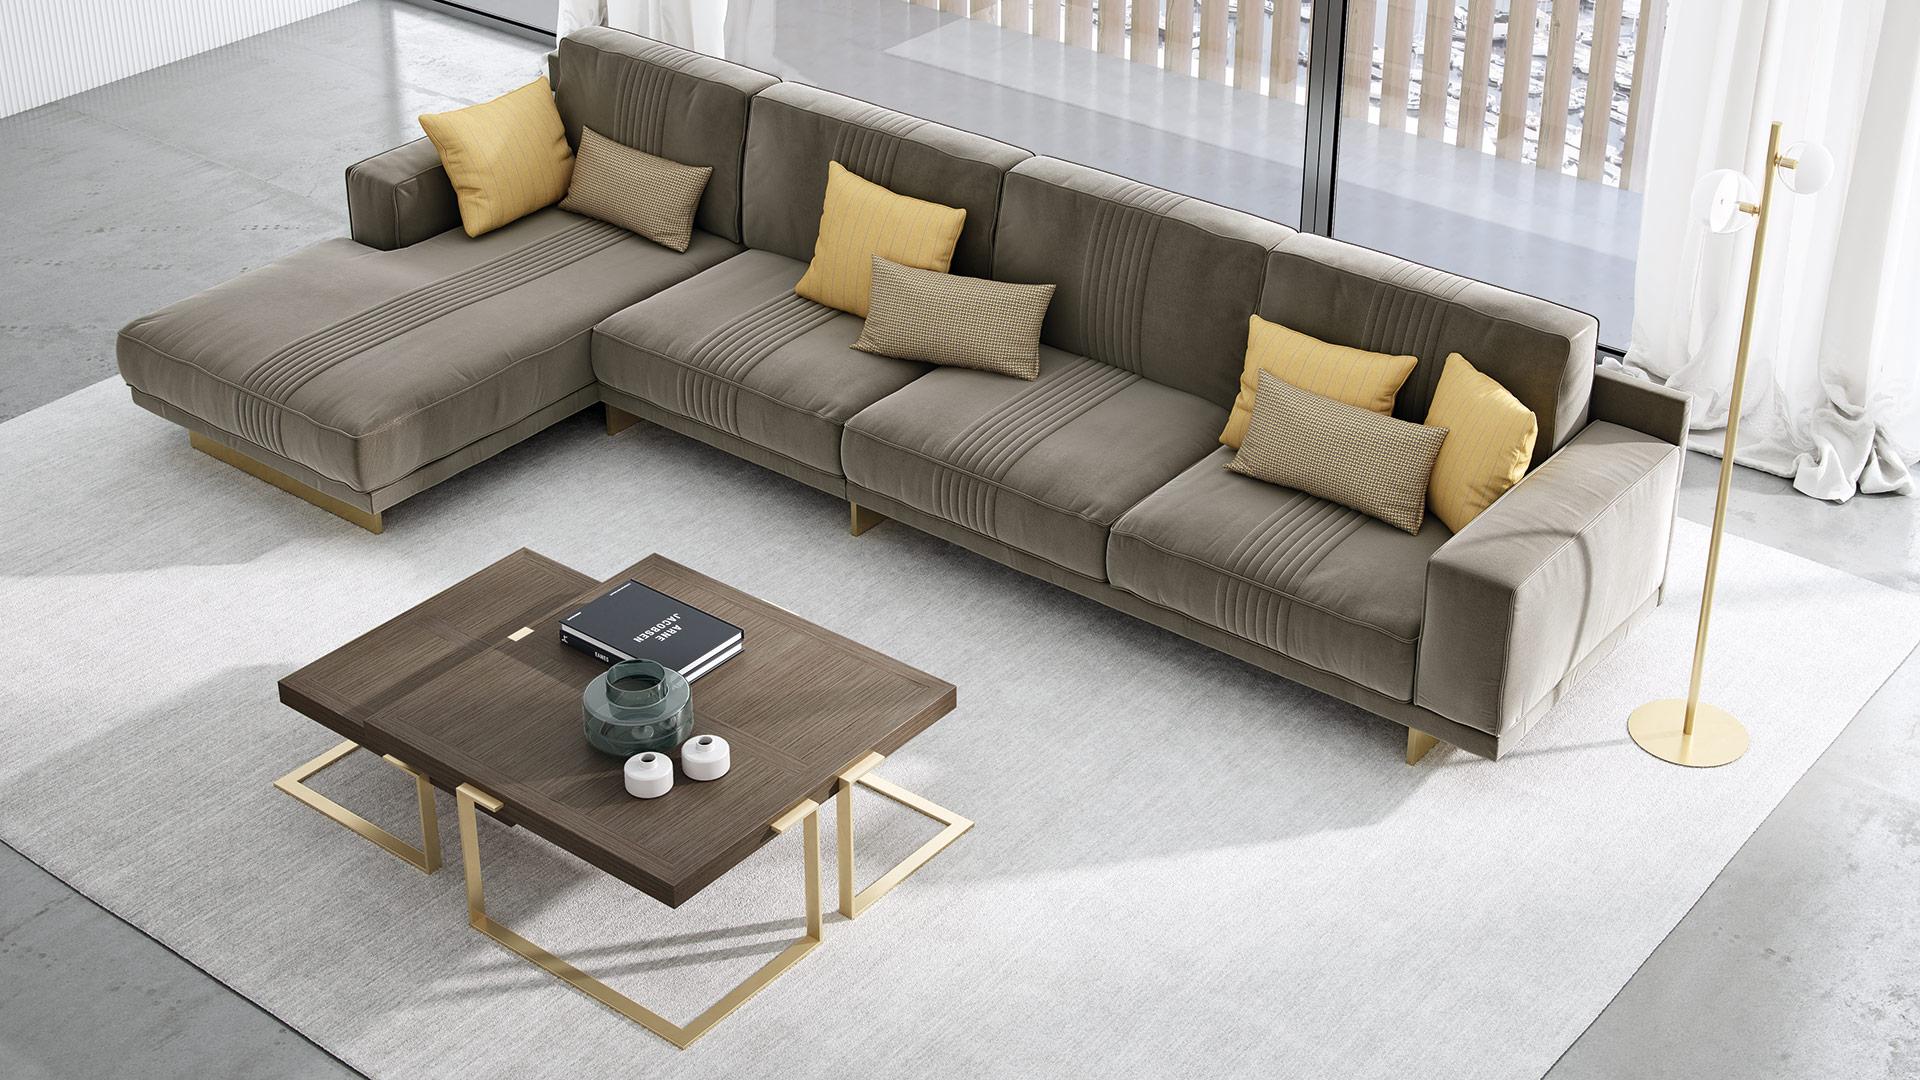 Modular sofa characterized by a soft backrest perfectly shaped that enhances the comfort.
The metal base is in gold finishing and improves the modern look of the sofa.
On the back and on the seating complete the design thanks to pipeline